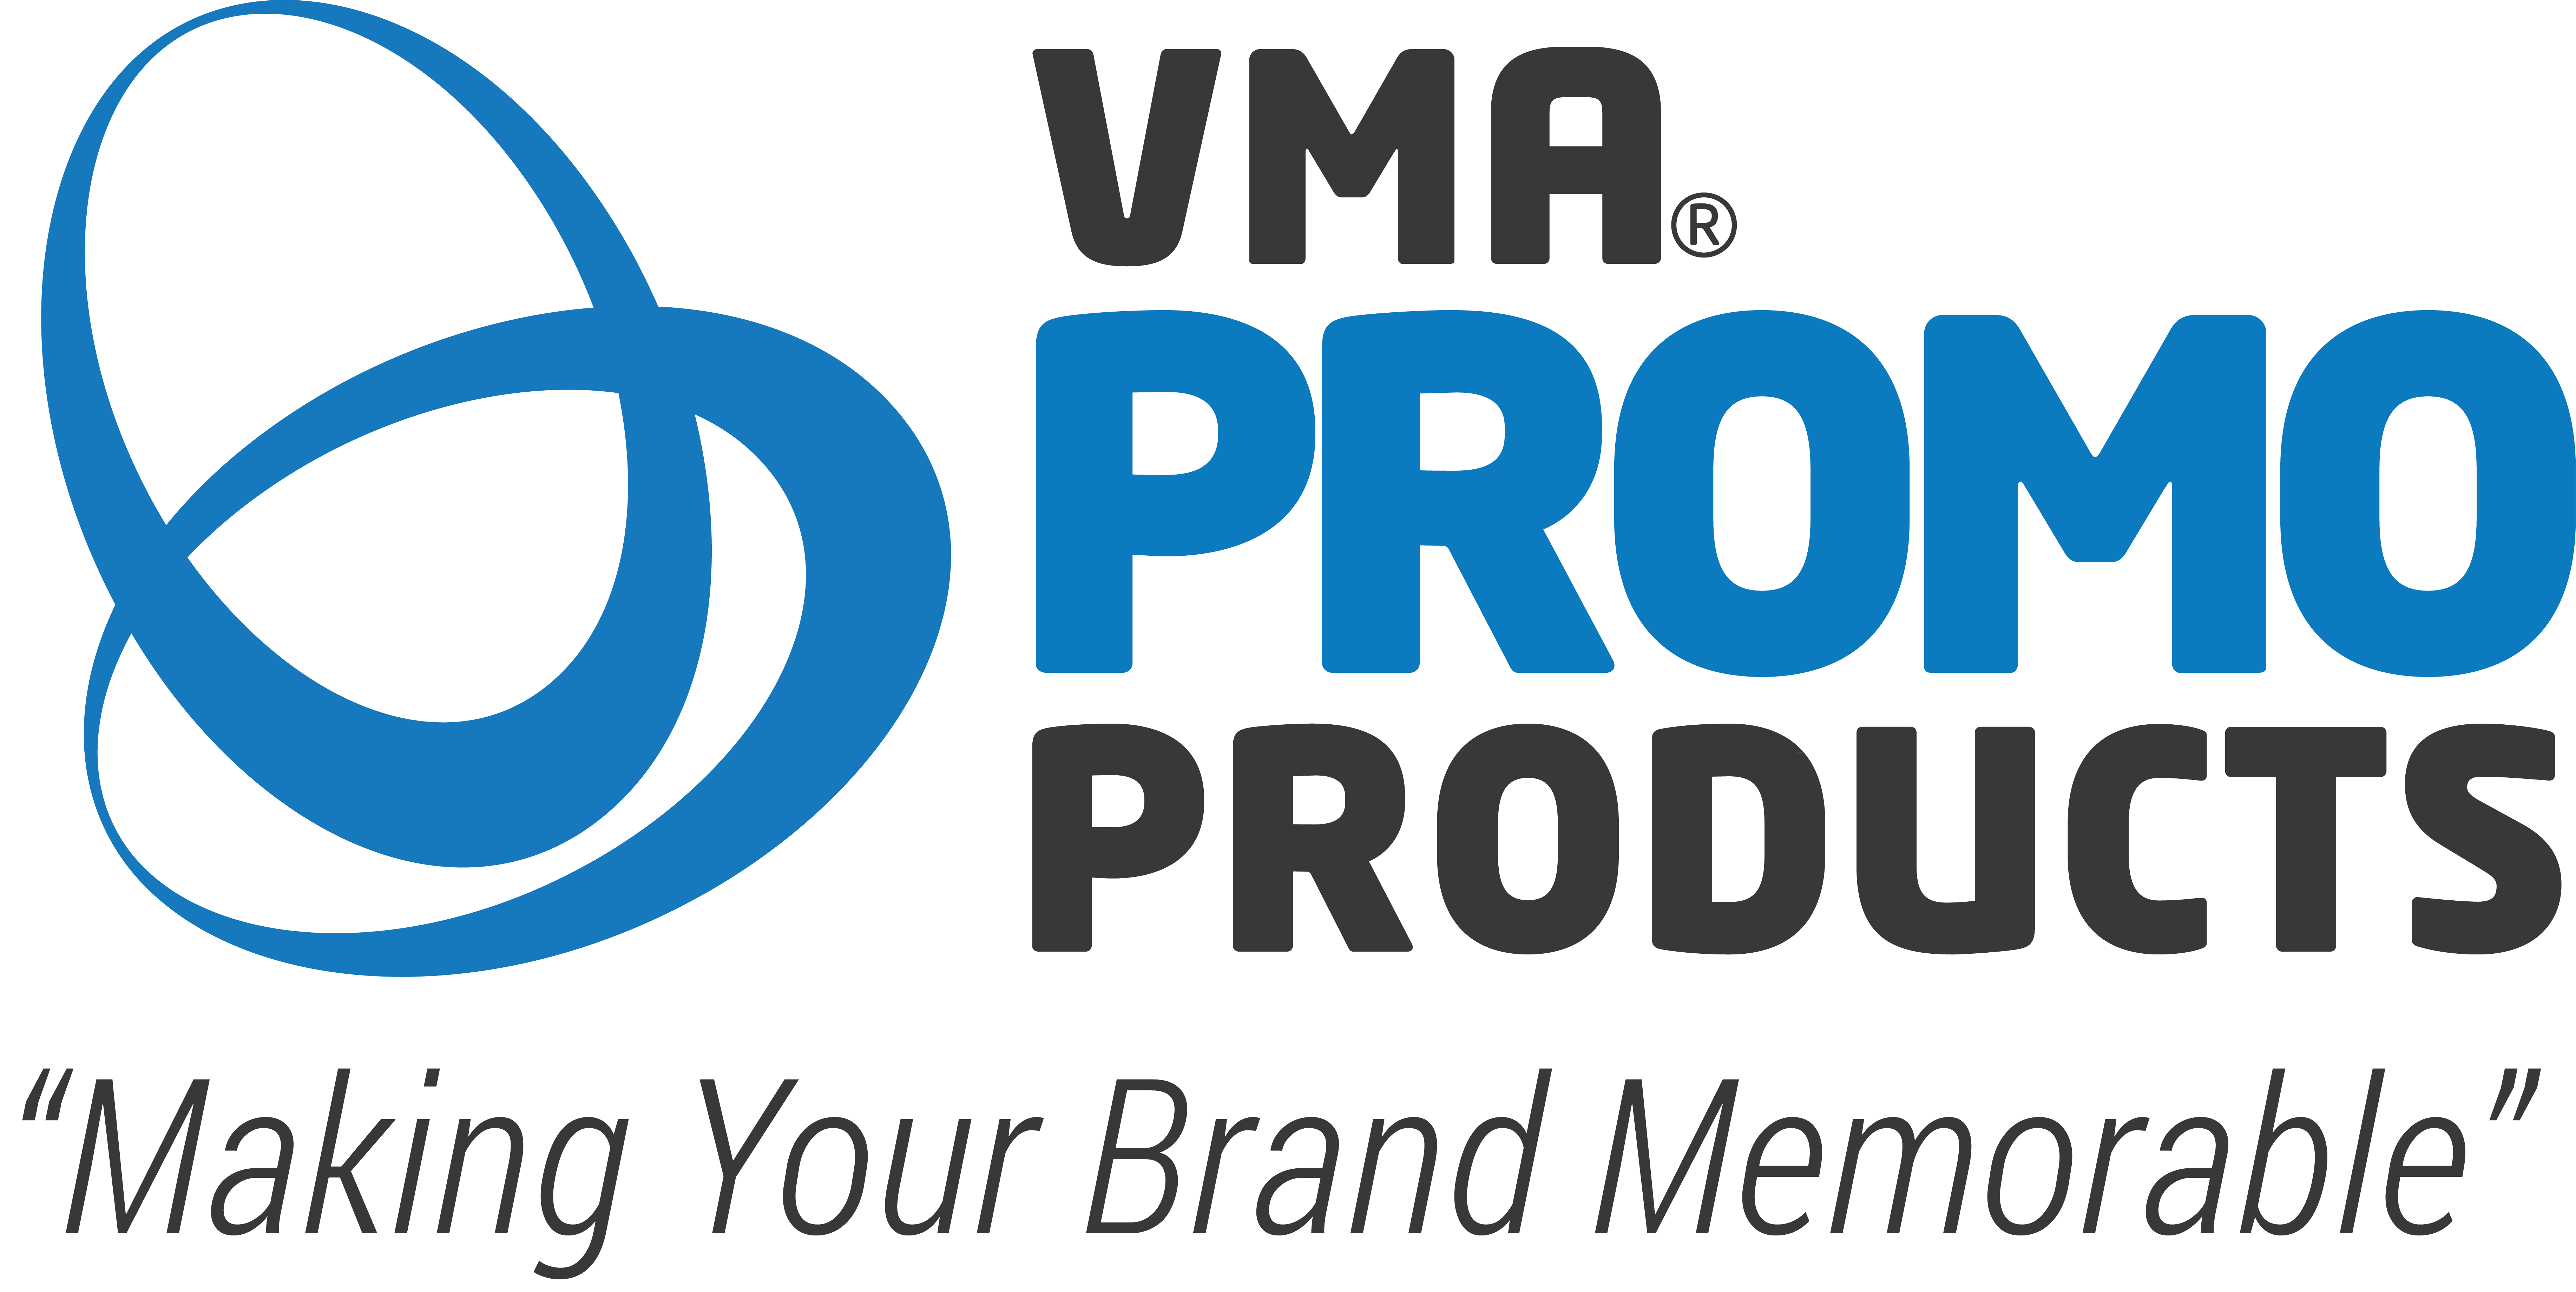 VMA Promotional Products Logo